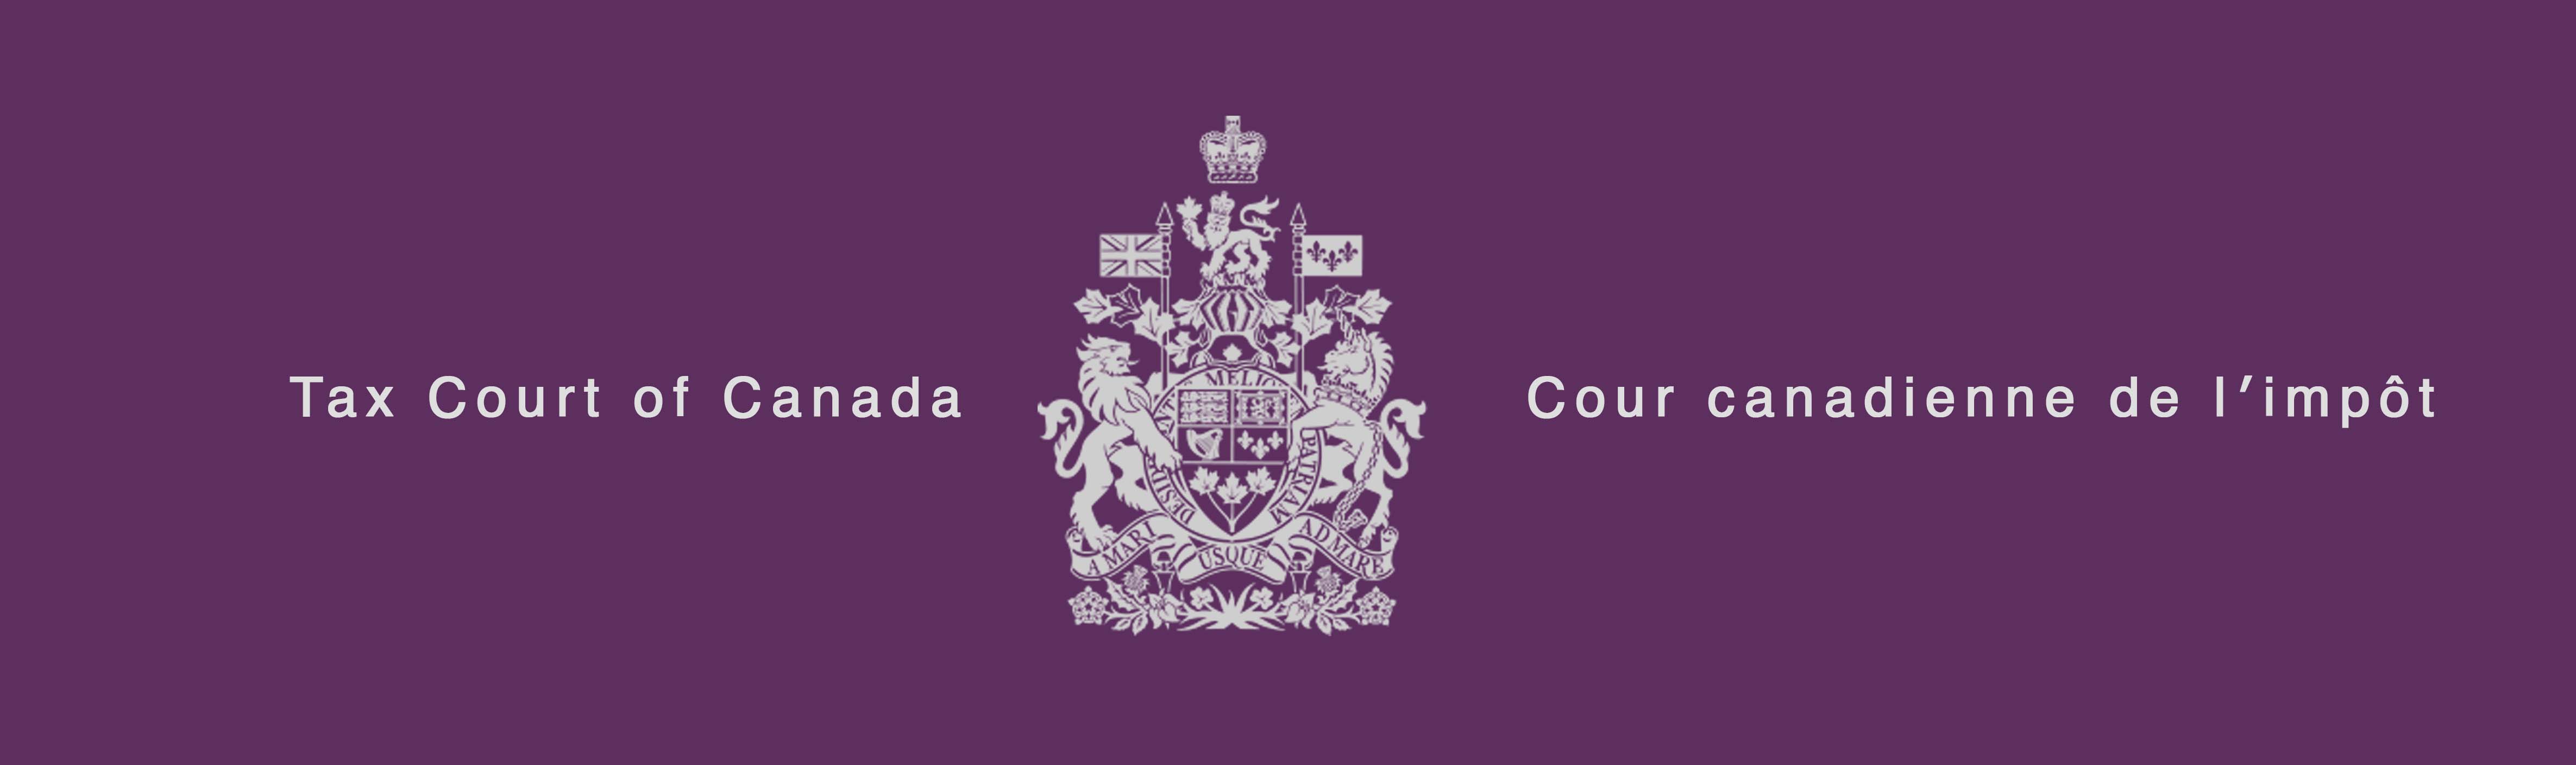 Tab 8: Tax Court of Canada